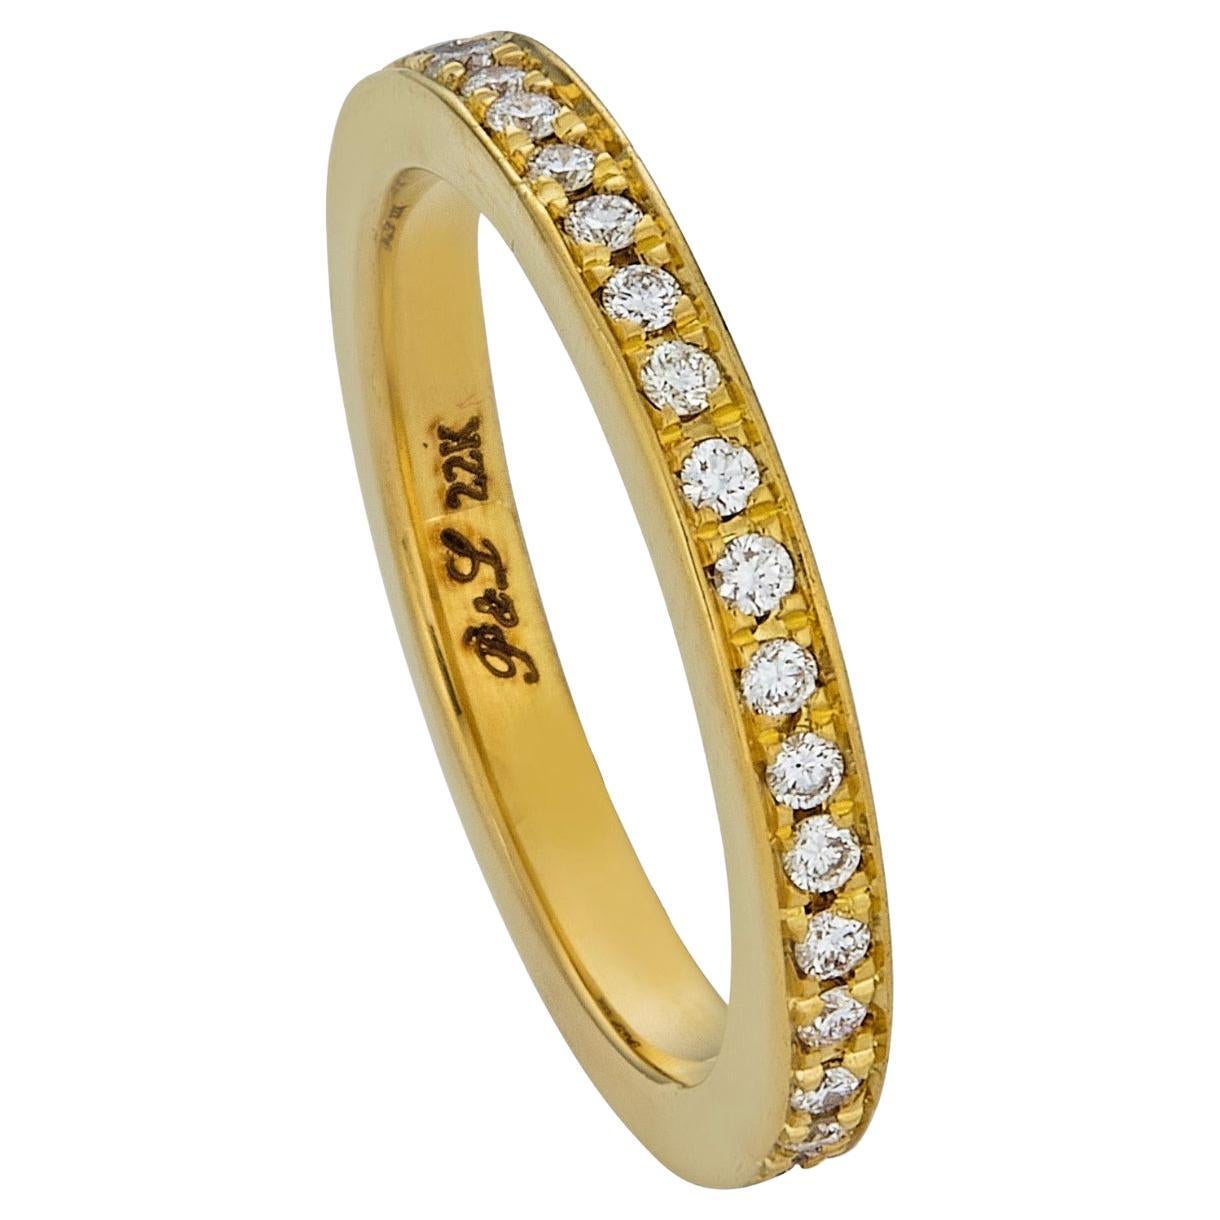 Paris & Lily, One-of-a-Kind, Handmade, 22k Gold Band with Diamonds For Sale